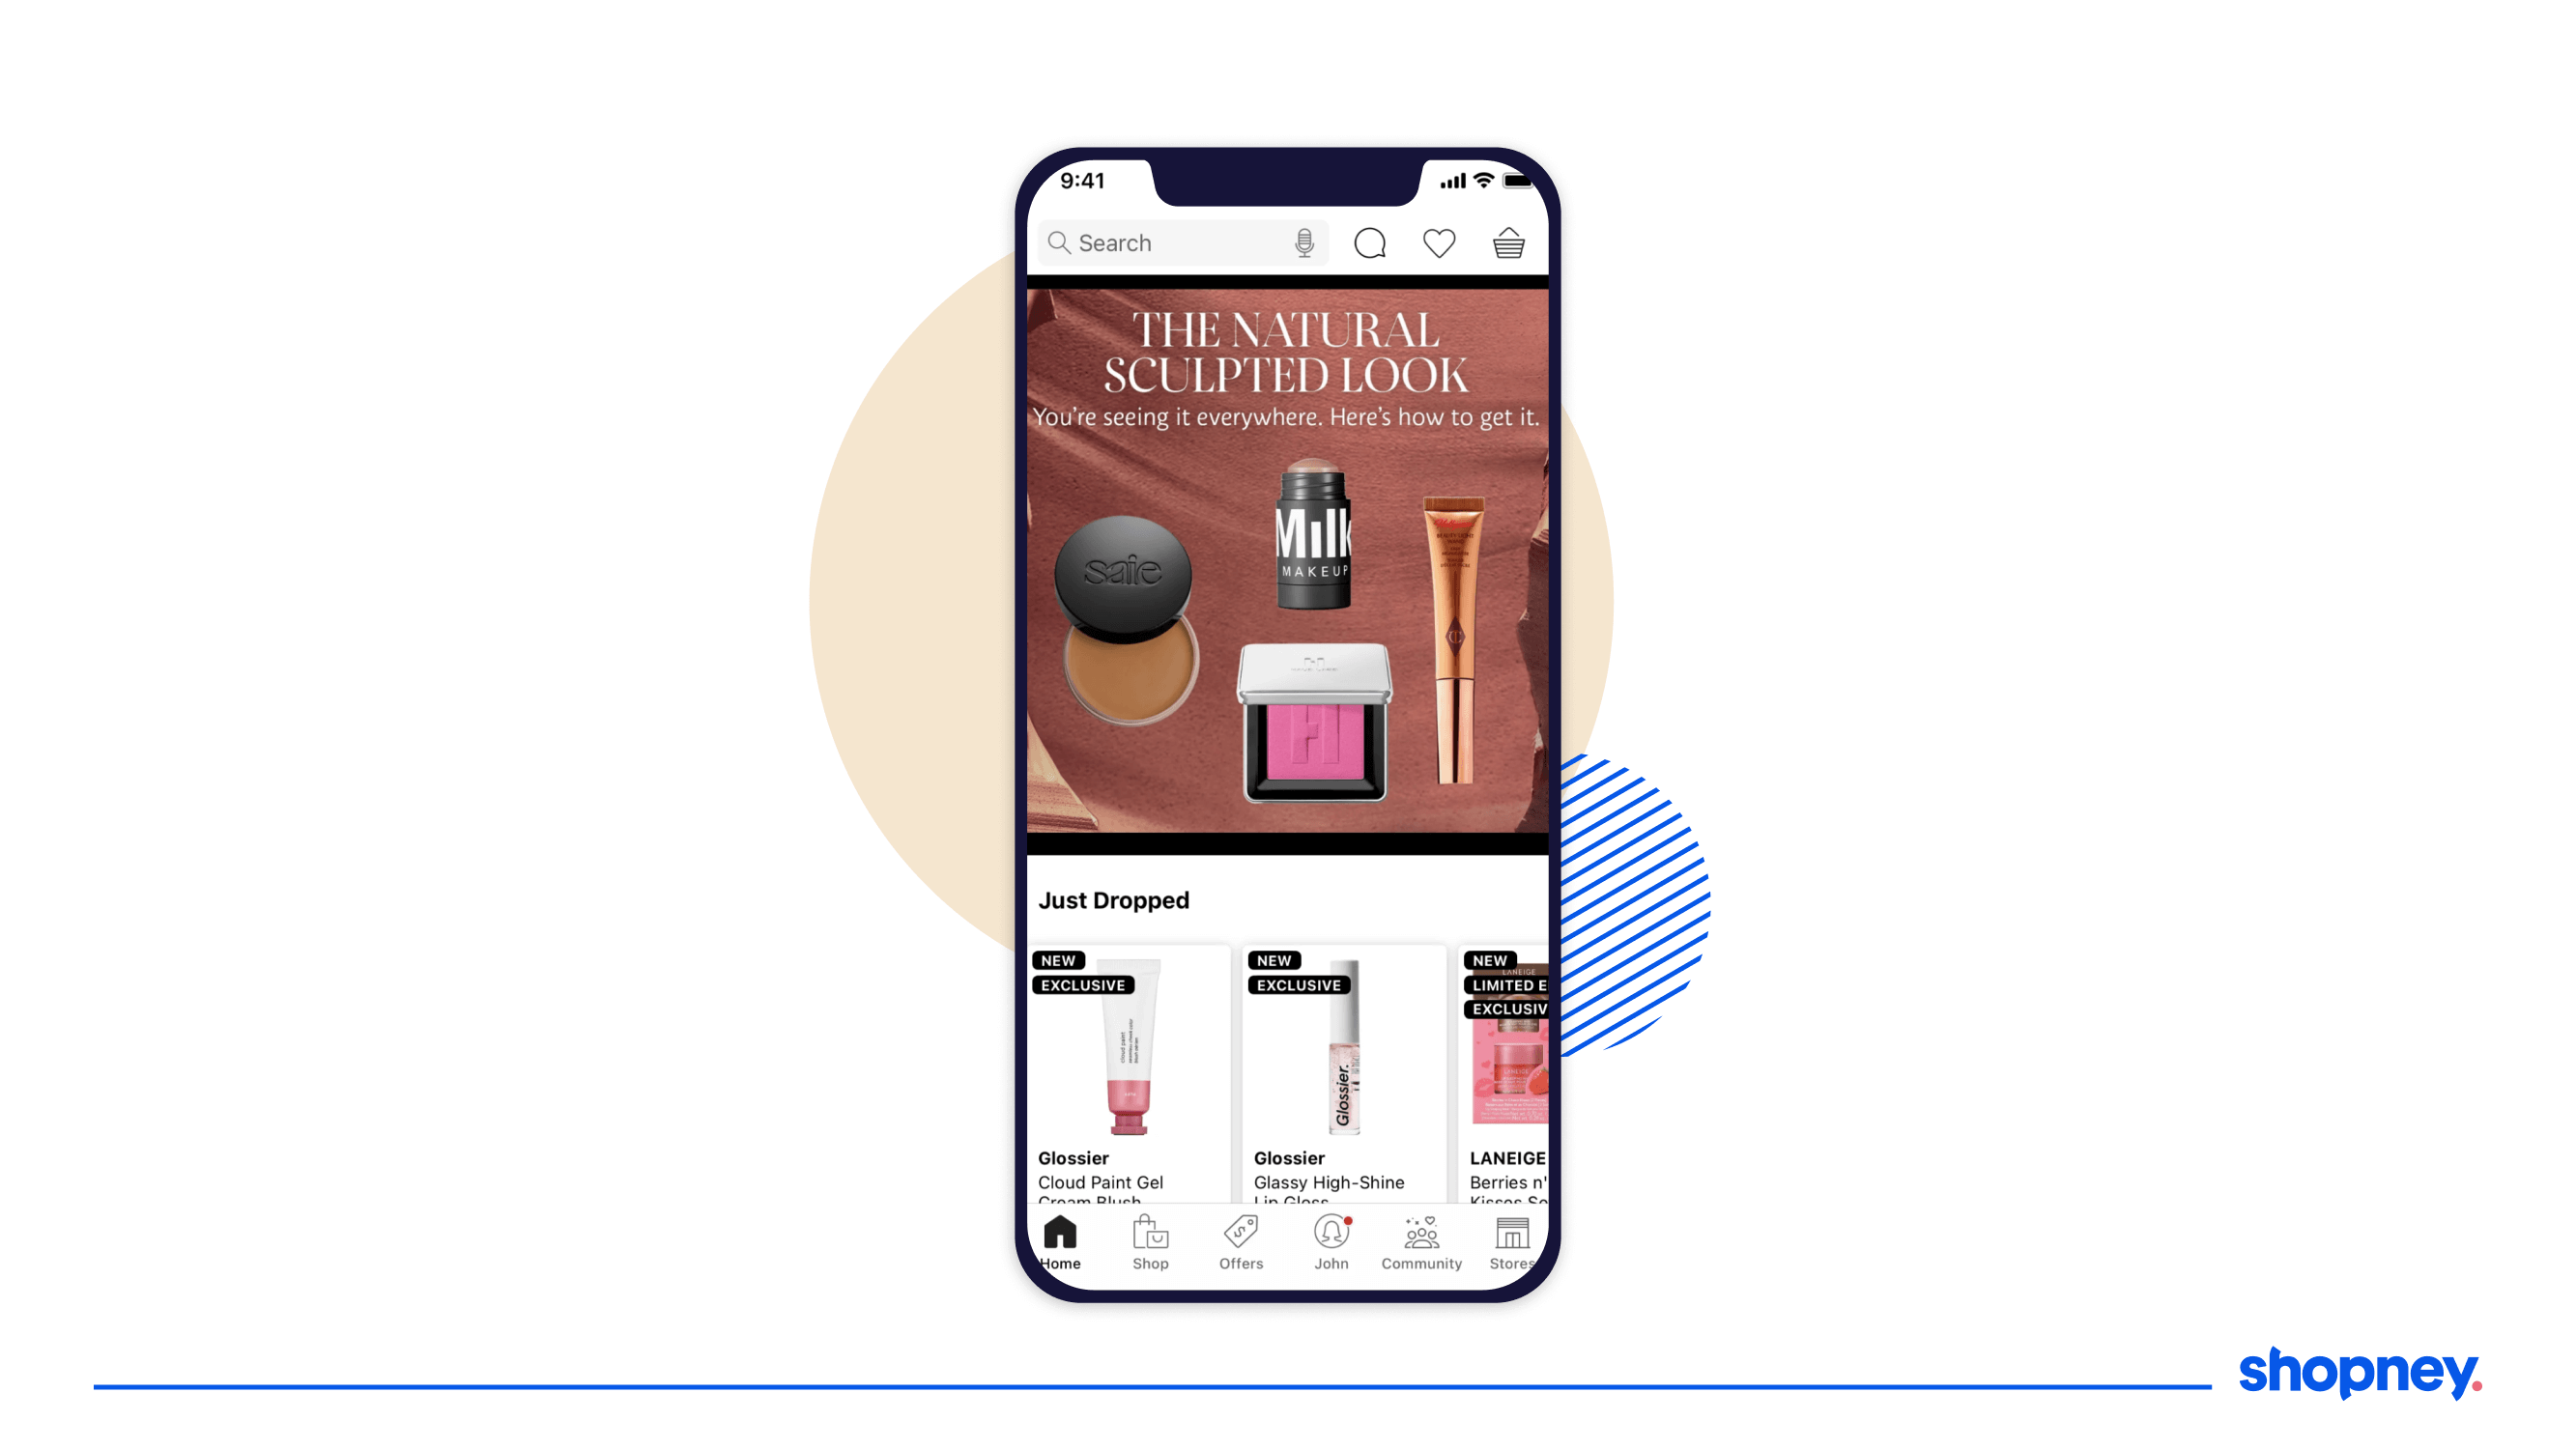 Just dropped section on Sephora app